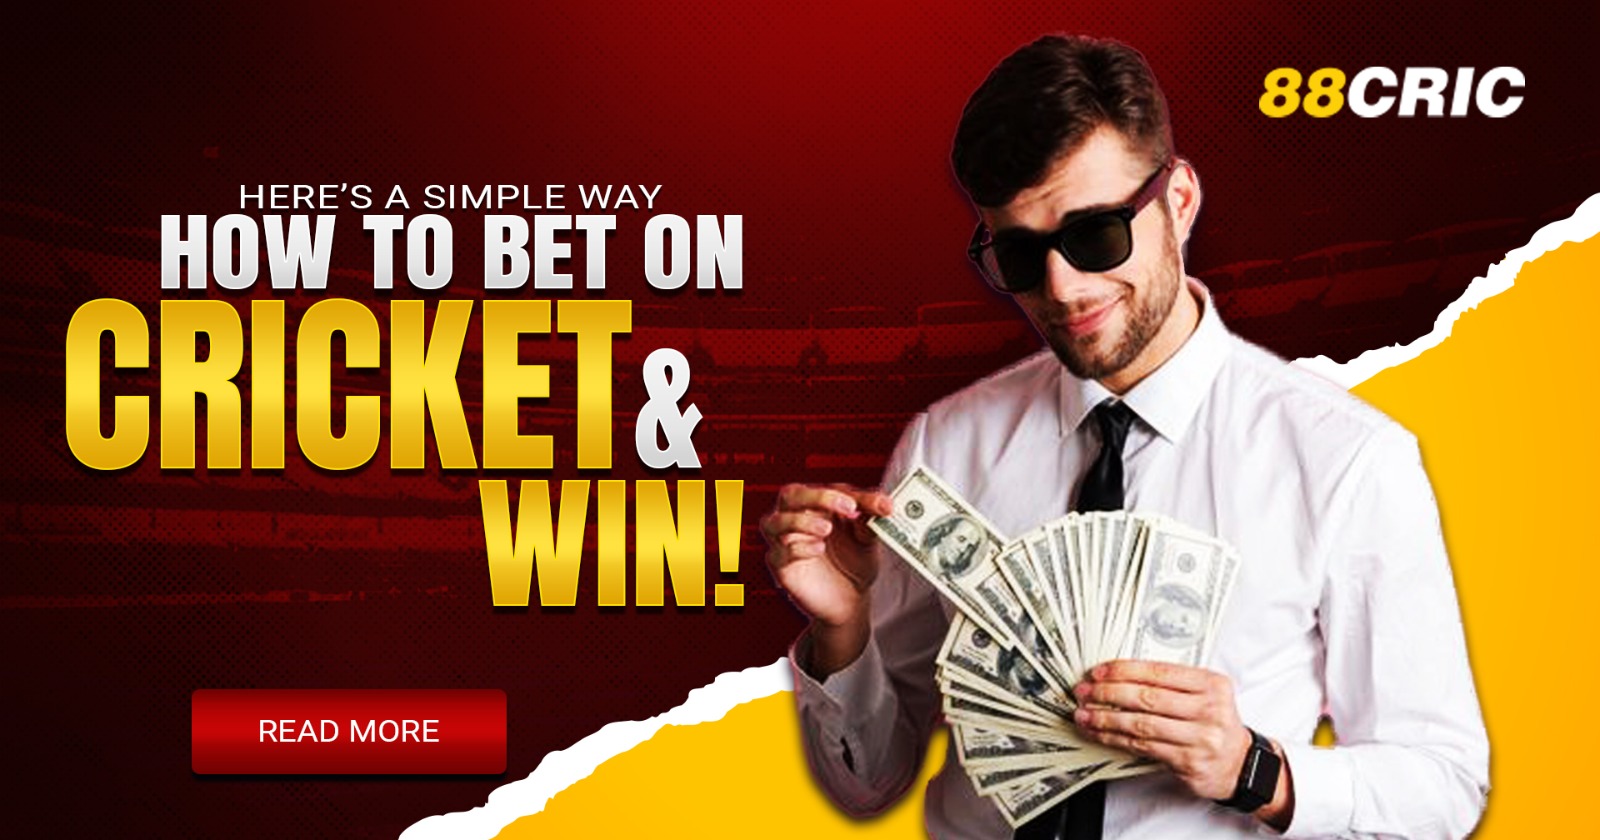 Here’s A Simple Way: How to Bet on Cricket and Win! – A4Everyone